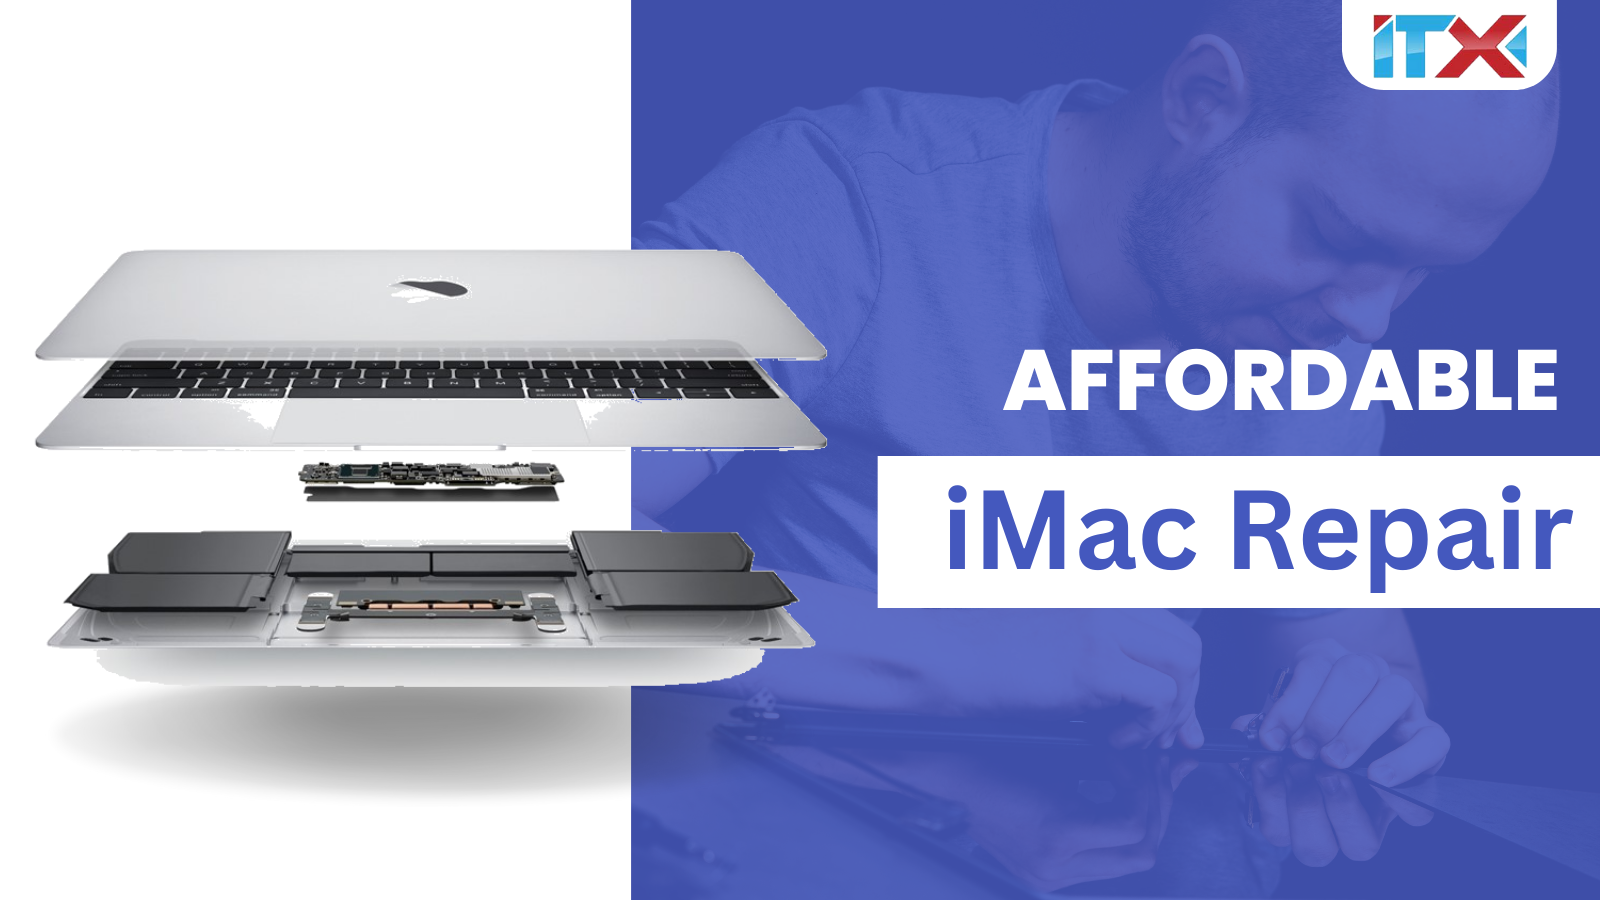 Affordable services of iMac repair near me